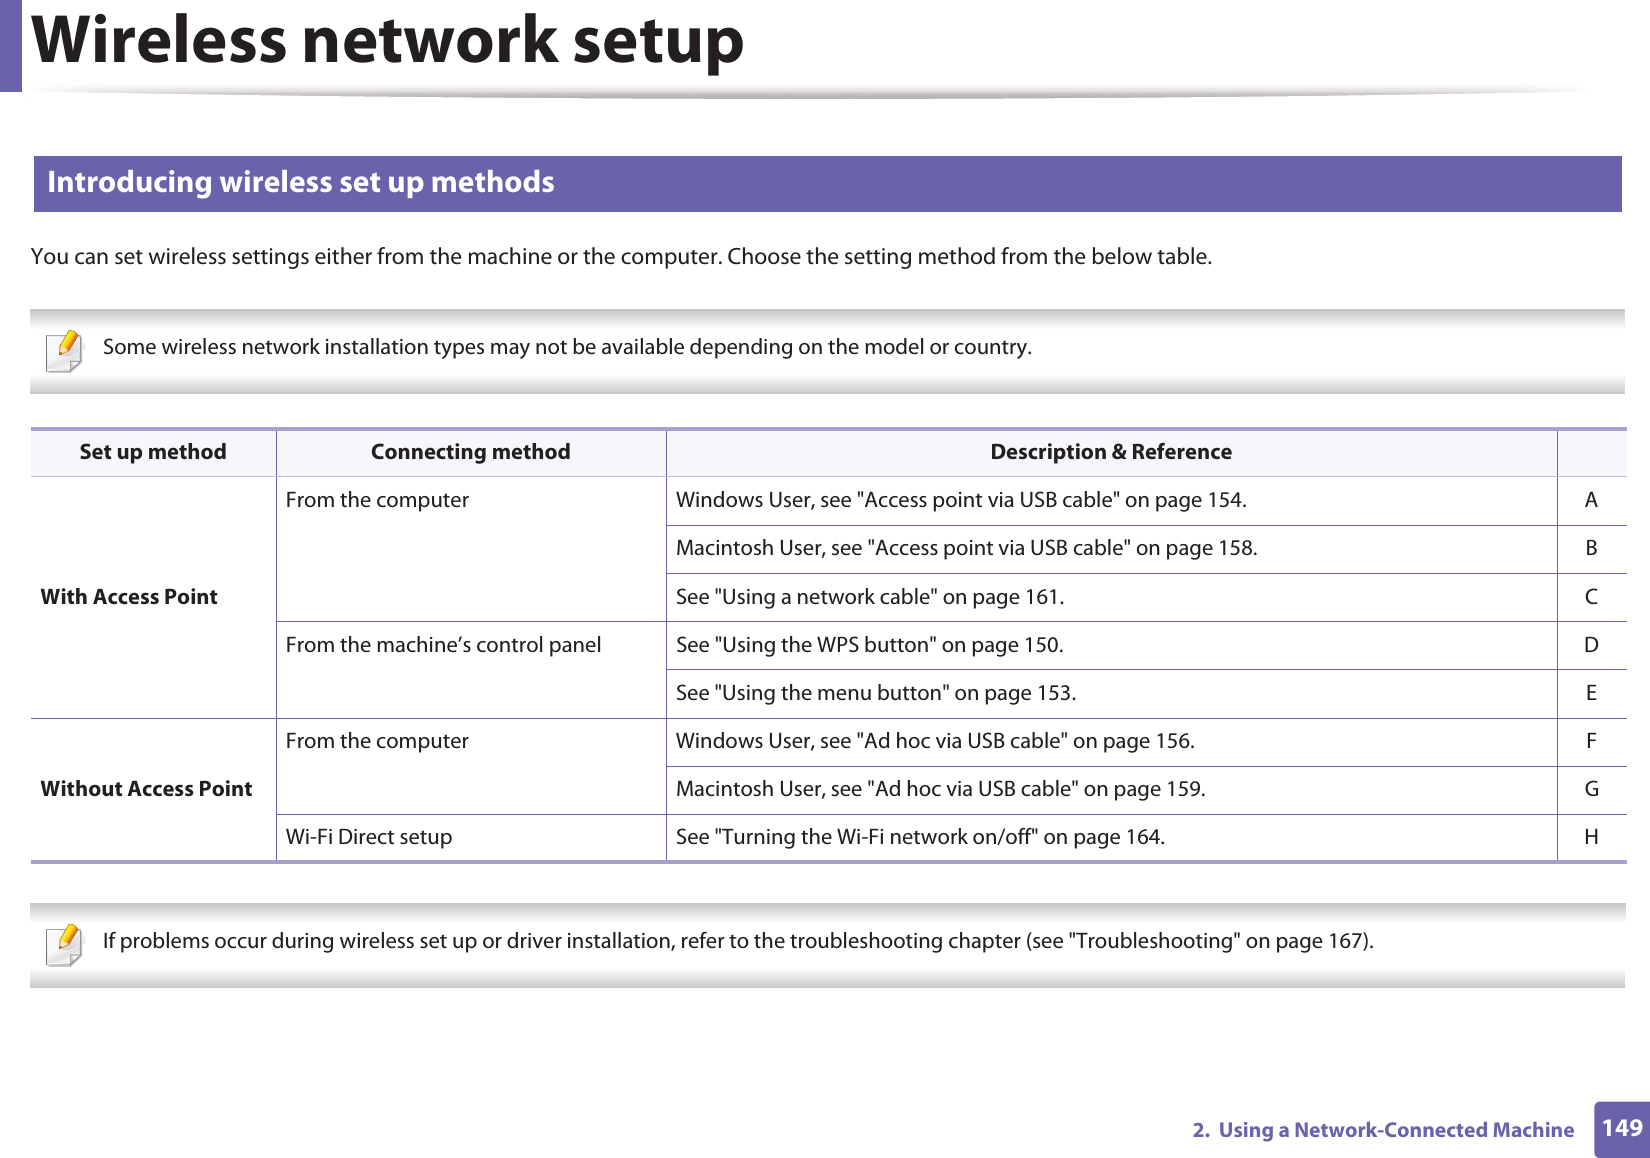 Wireless network setup1492.  Using a Network-Connected Machine13 Introducing wireless set up methodsYou can set wireless settings either from the machine or the computer. Choose the setting method from the below table. Some wireless network installation types may not be available depending on the model or country.    If problems occur during wireless set up or driver installation, refer to the troubleshooting chapter (see &quot;Troubleshooting&quot; on page 167). Set up method Connecting method Description &amp; ReferenceWith Access Point From the computer Windows User, see &quot;Access point via USB cable&quot; on page 154. AMacintosh User, see &quot;Access point via USB cable&quot; on page 158. BSee &quot;Using a network cable&quot; on page 161. CFrom the machine’s control panel See &quot;Using the WPS button&quot; on page 150. DSee &quot;Using the menu button&quot; on page 153. EWithout Access Point From the computer Windows User, see &quot;Ad hoc via USB cable&quot; on page 156. FMacintosh User, see &quot;Ad hoc via USB cable&quot; on page 159. GWi-Fi Direct setup See &quot;Turning the Wi-Fi network on/off&quot; on page 164. H